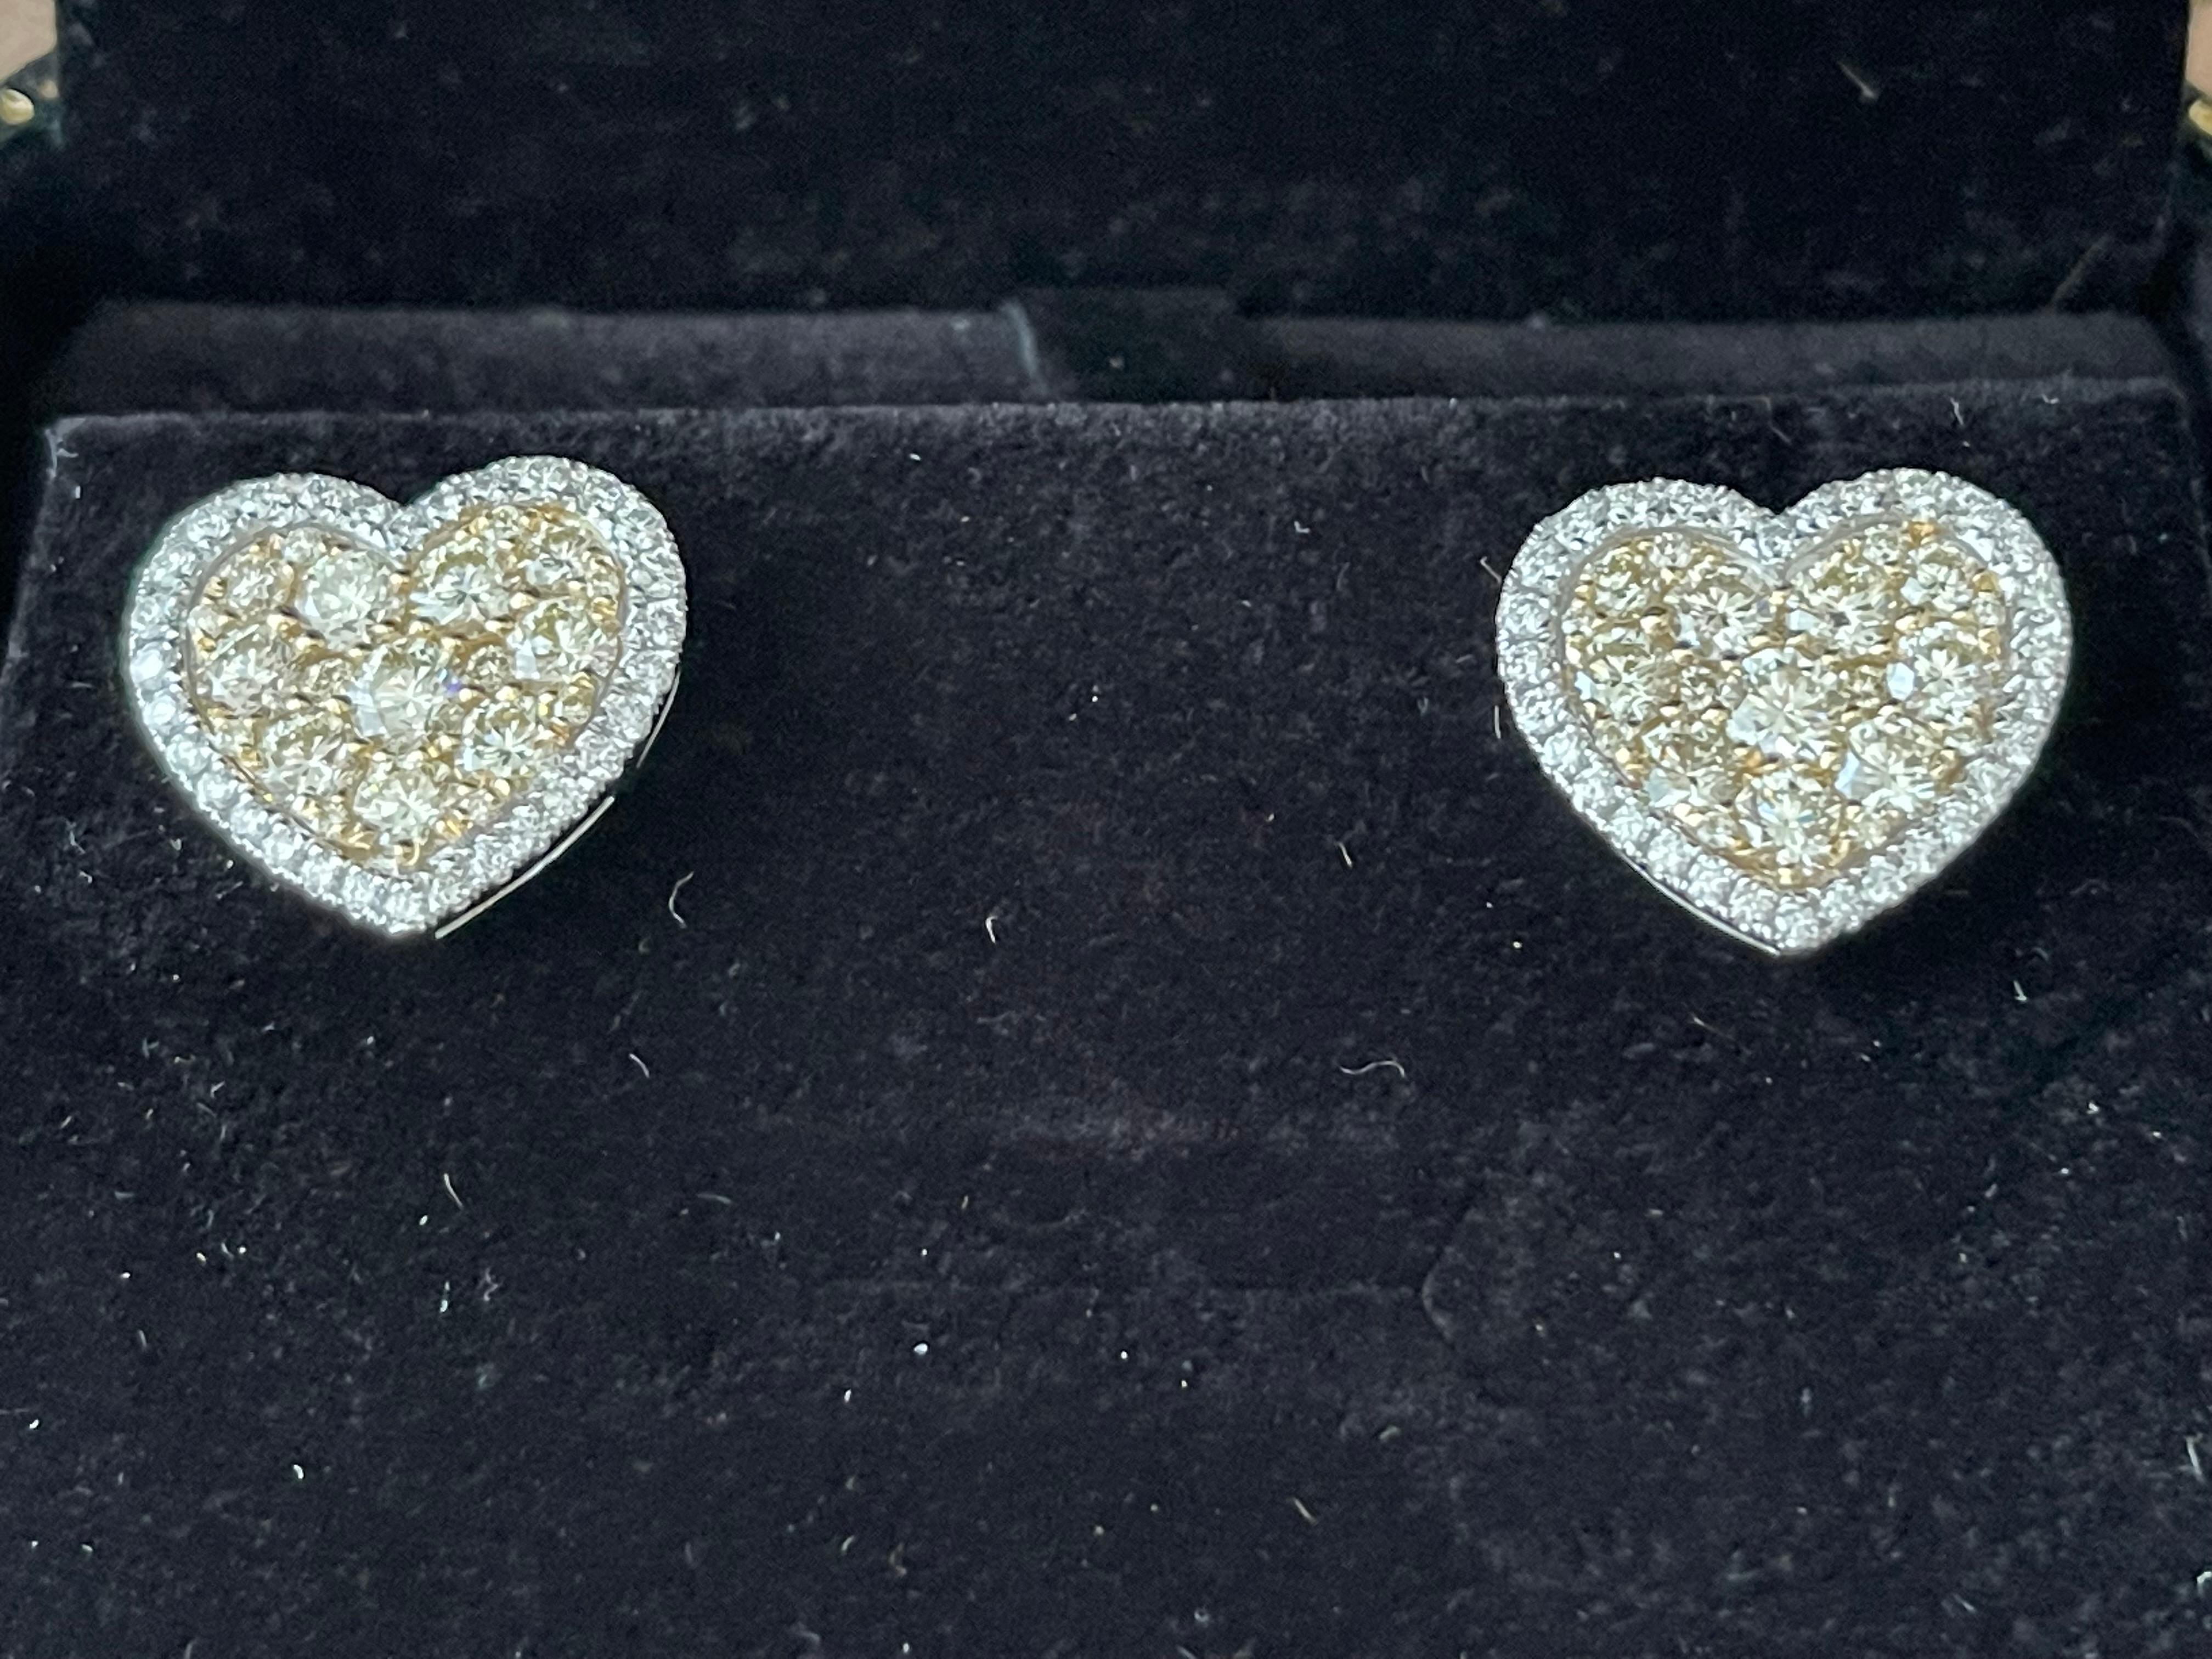 14 K Yelllow and White Gold 3.86 Total Carat Heart Shaped Earrings For Sale 4